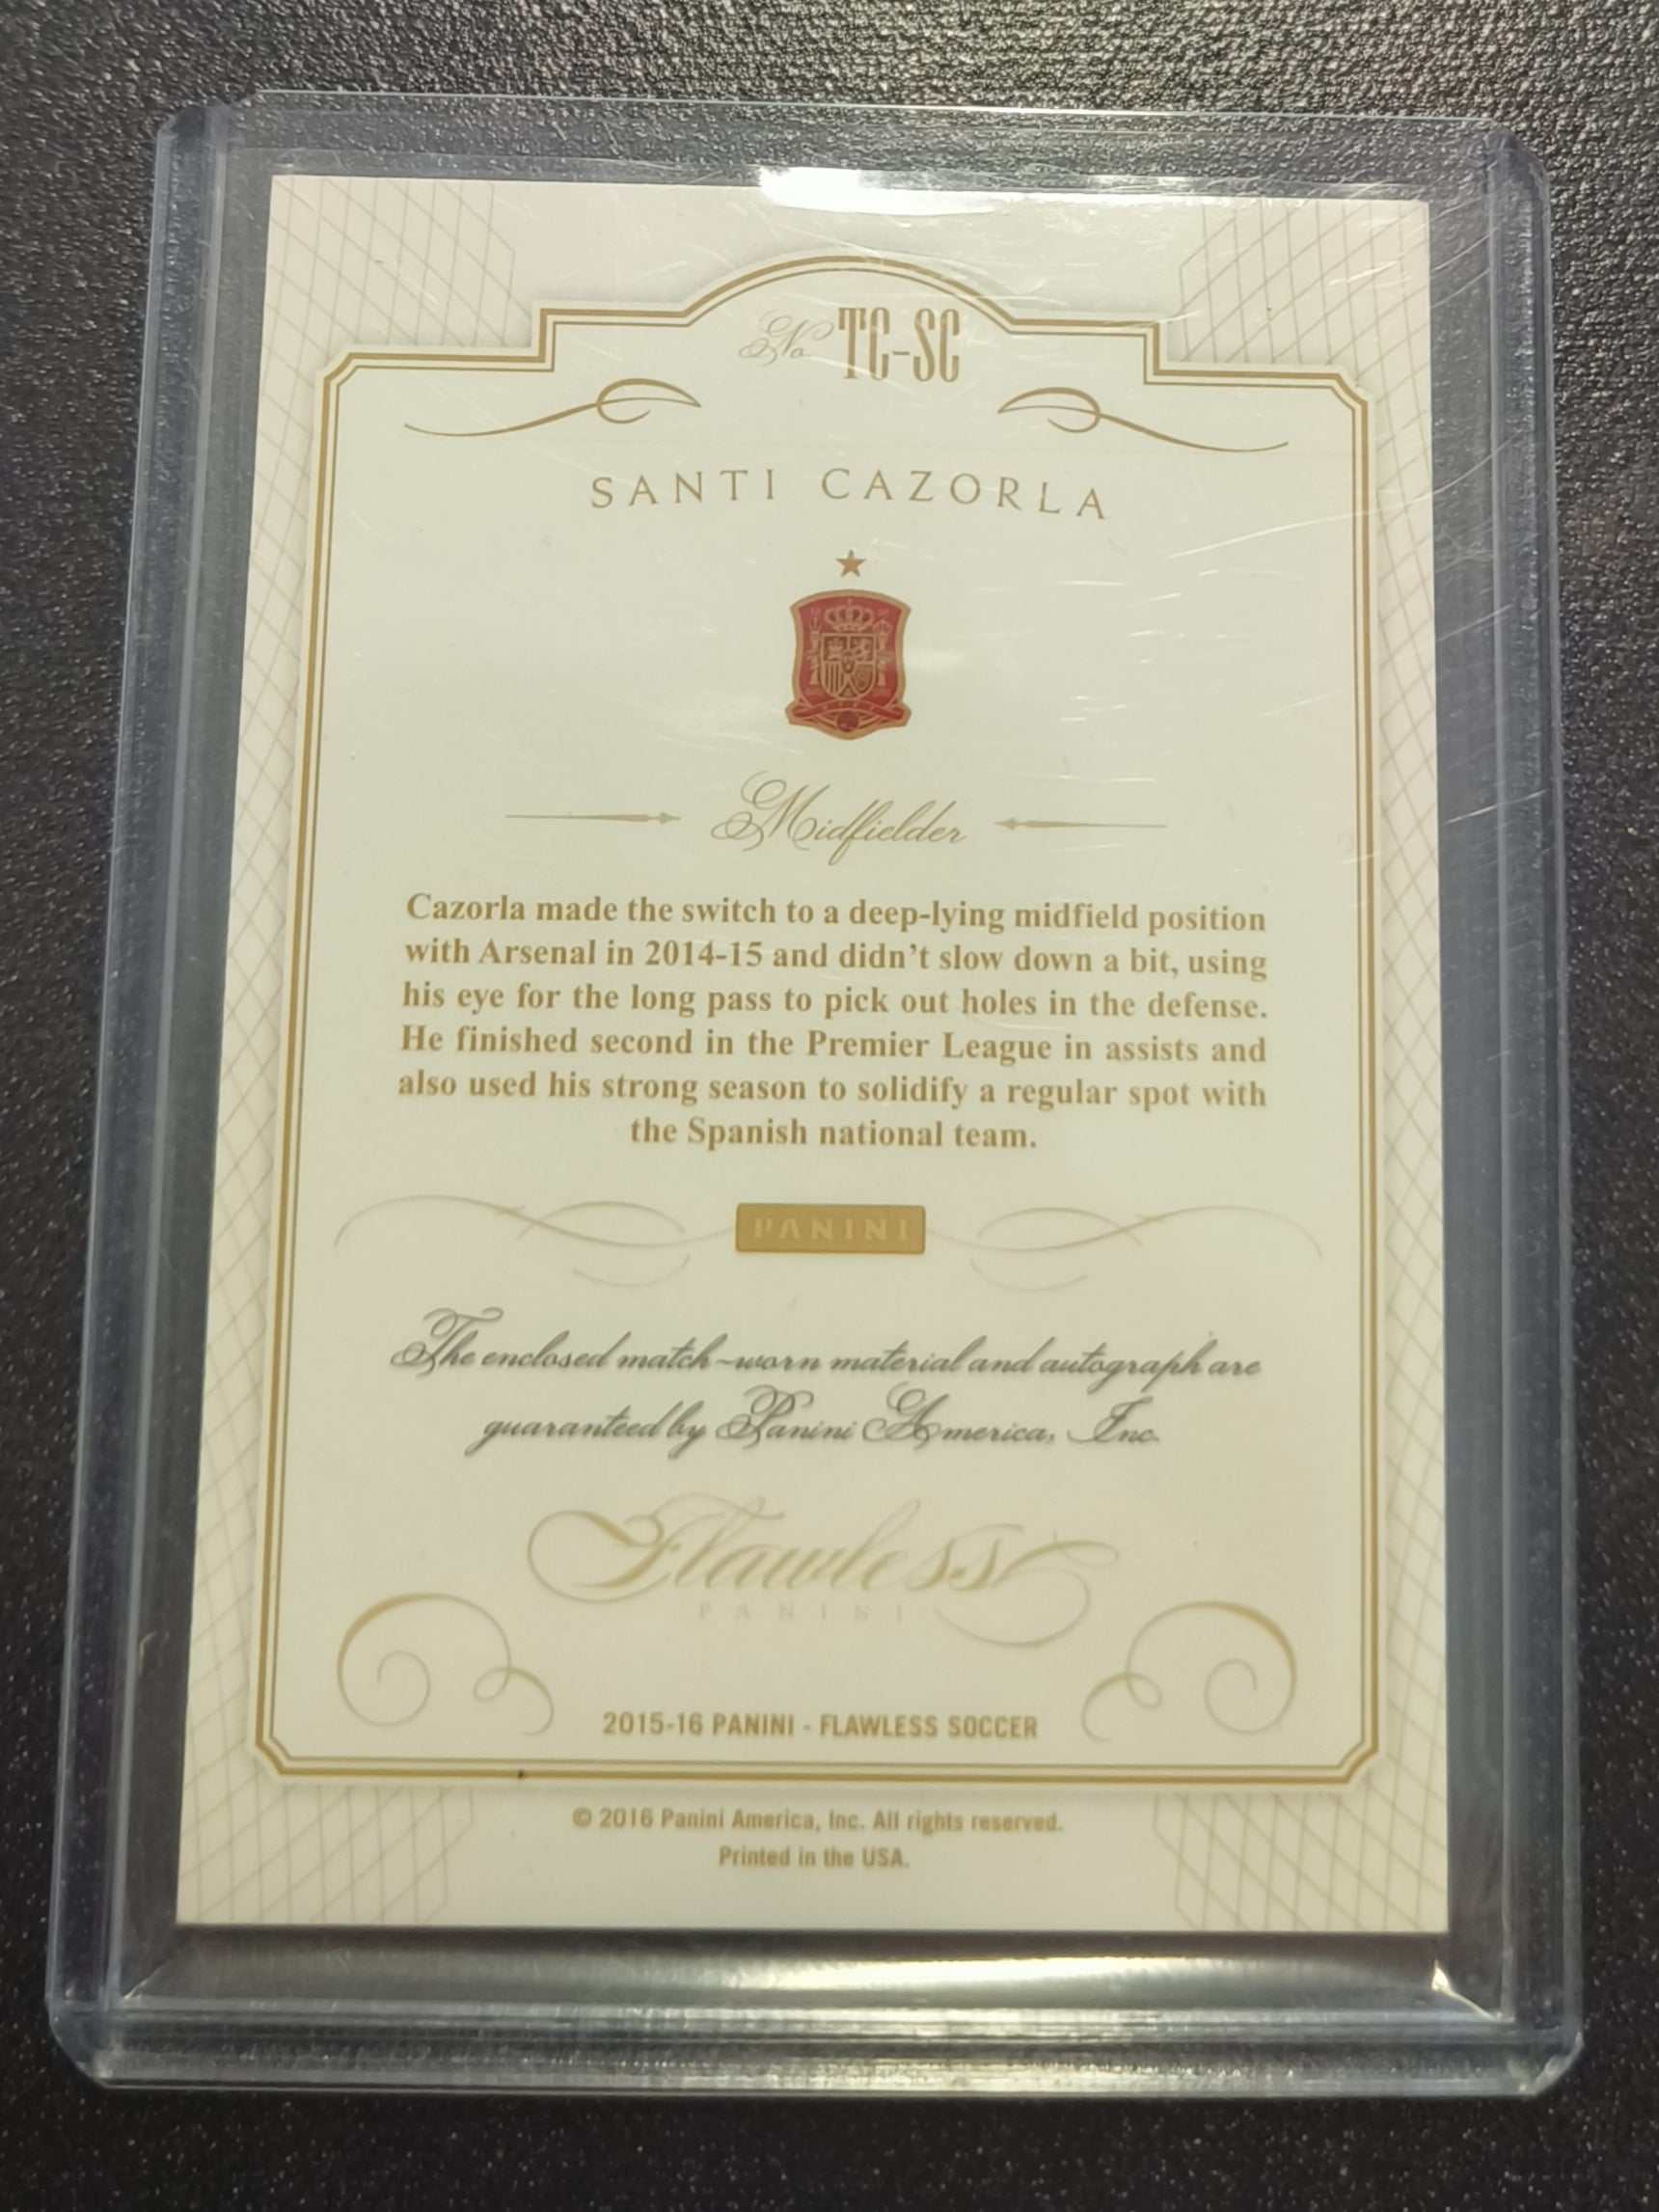 2016 Panini Flawless Top of the Class Autograph Memo Ruby